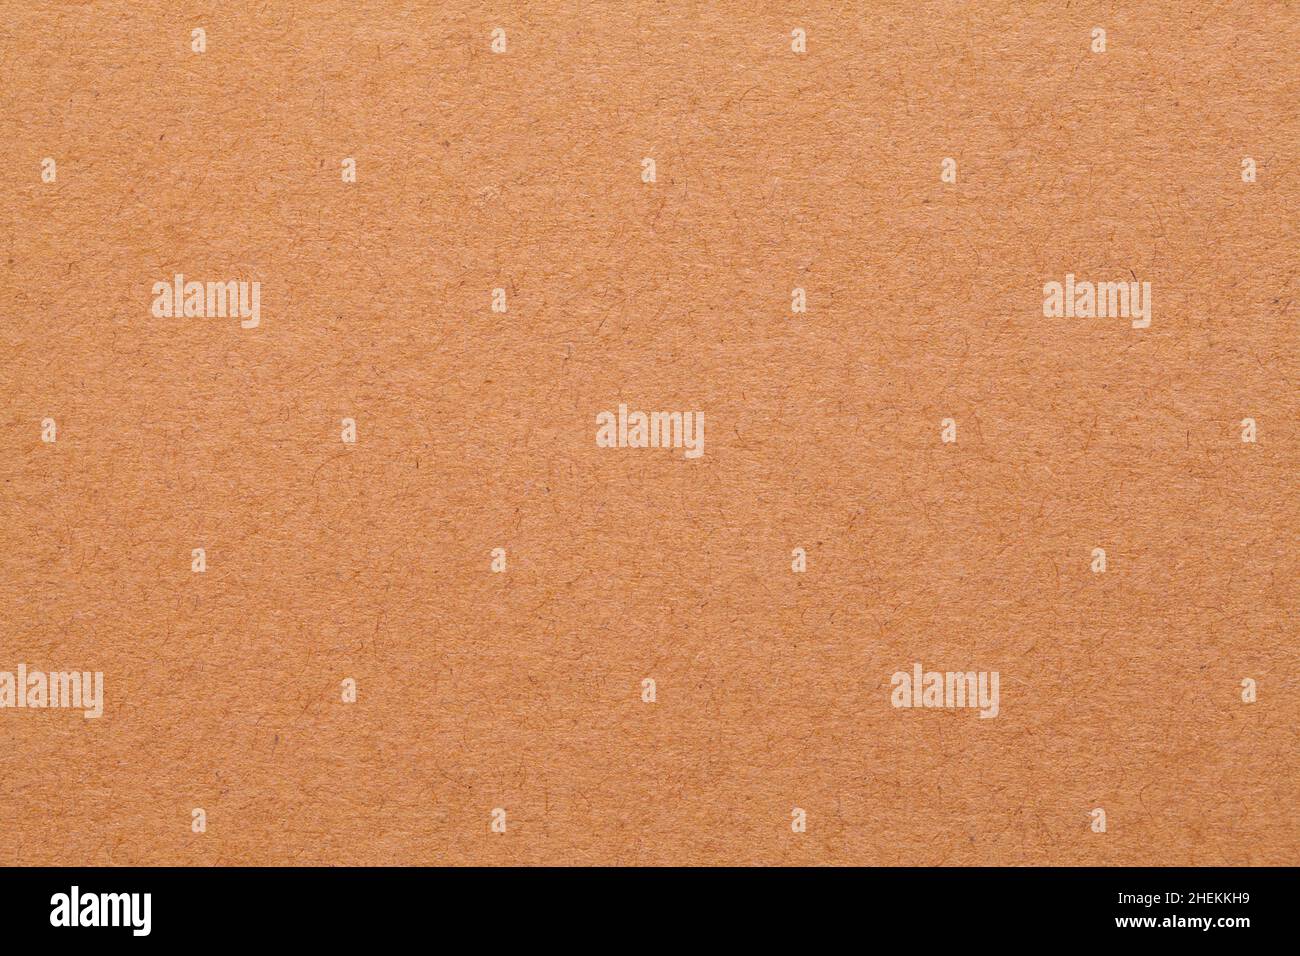 Flat Brown Cardboard Smooth Textured Background Close Up. Stock Photo